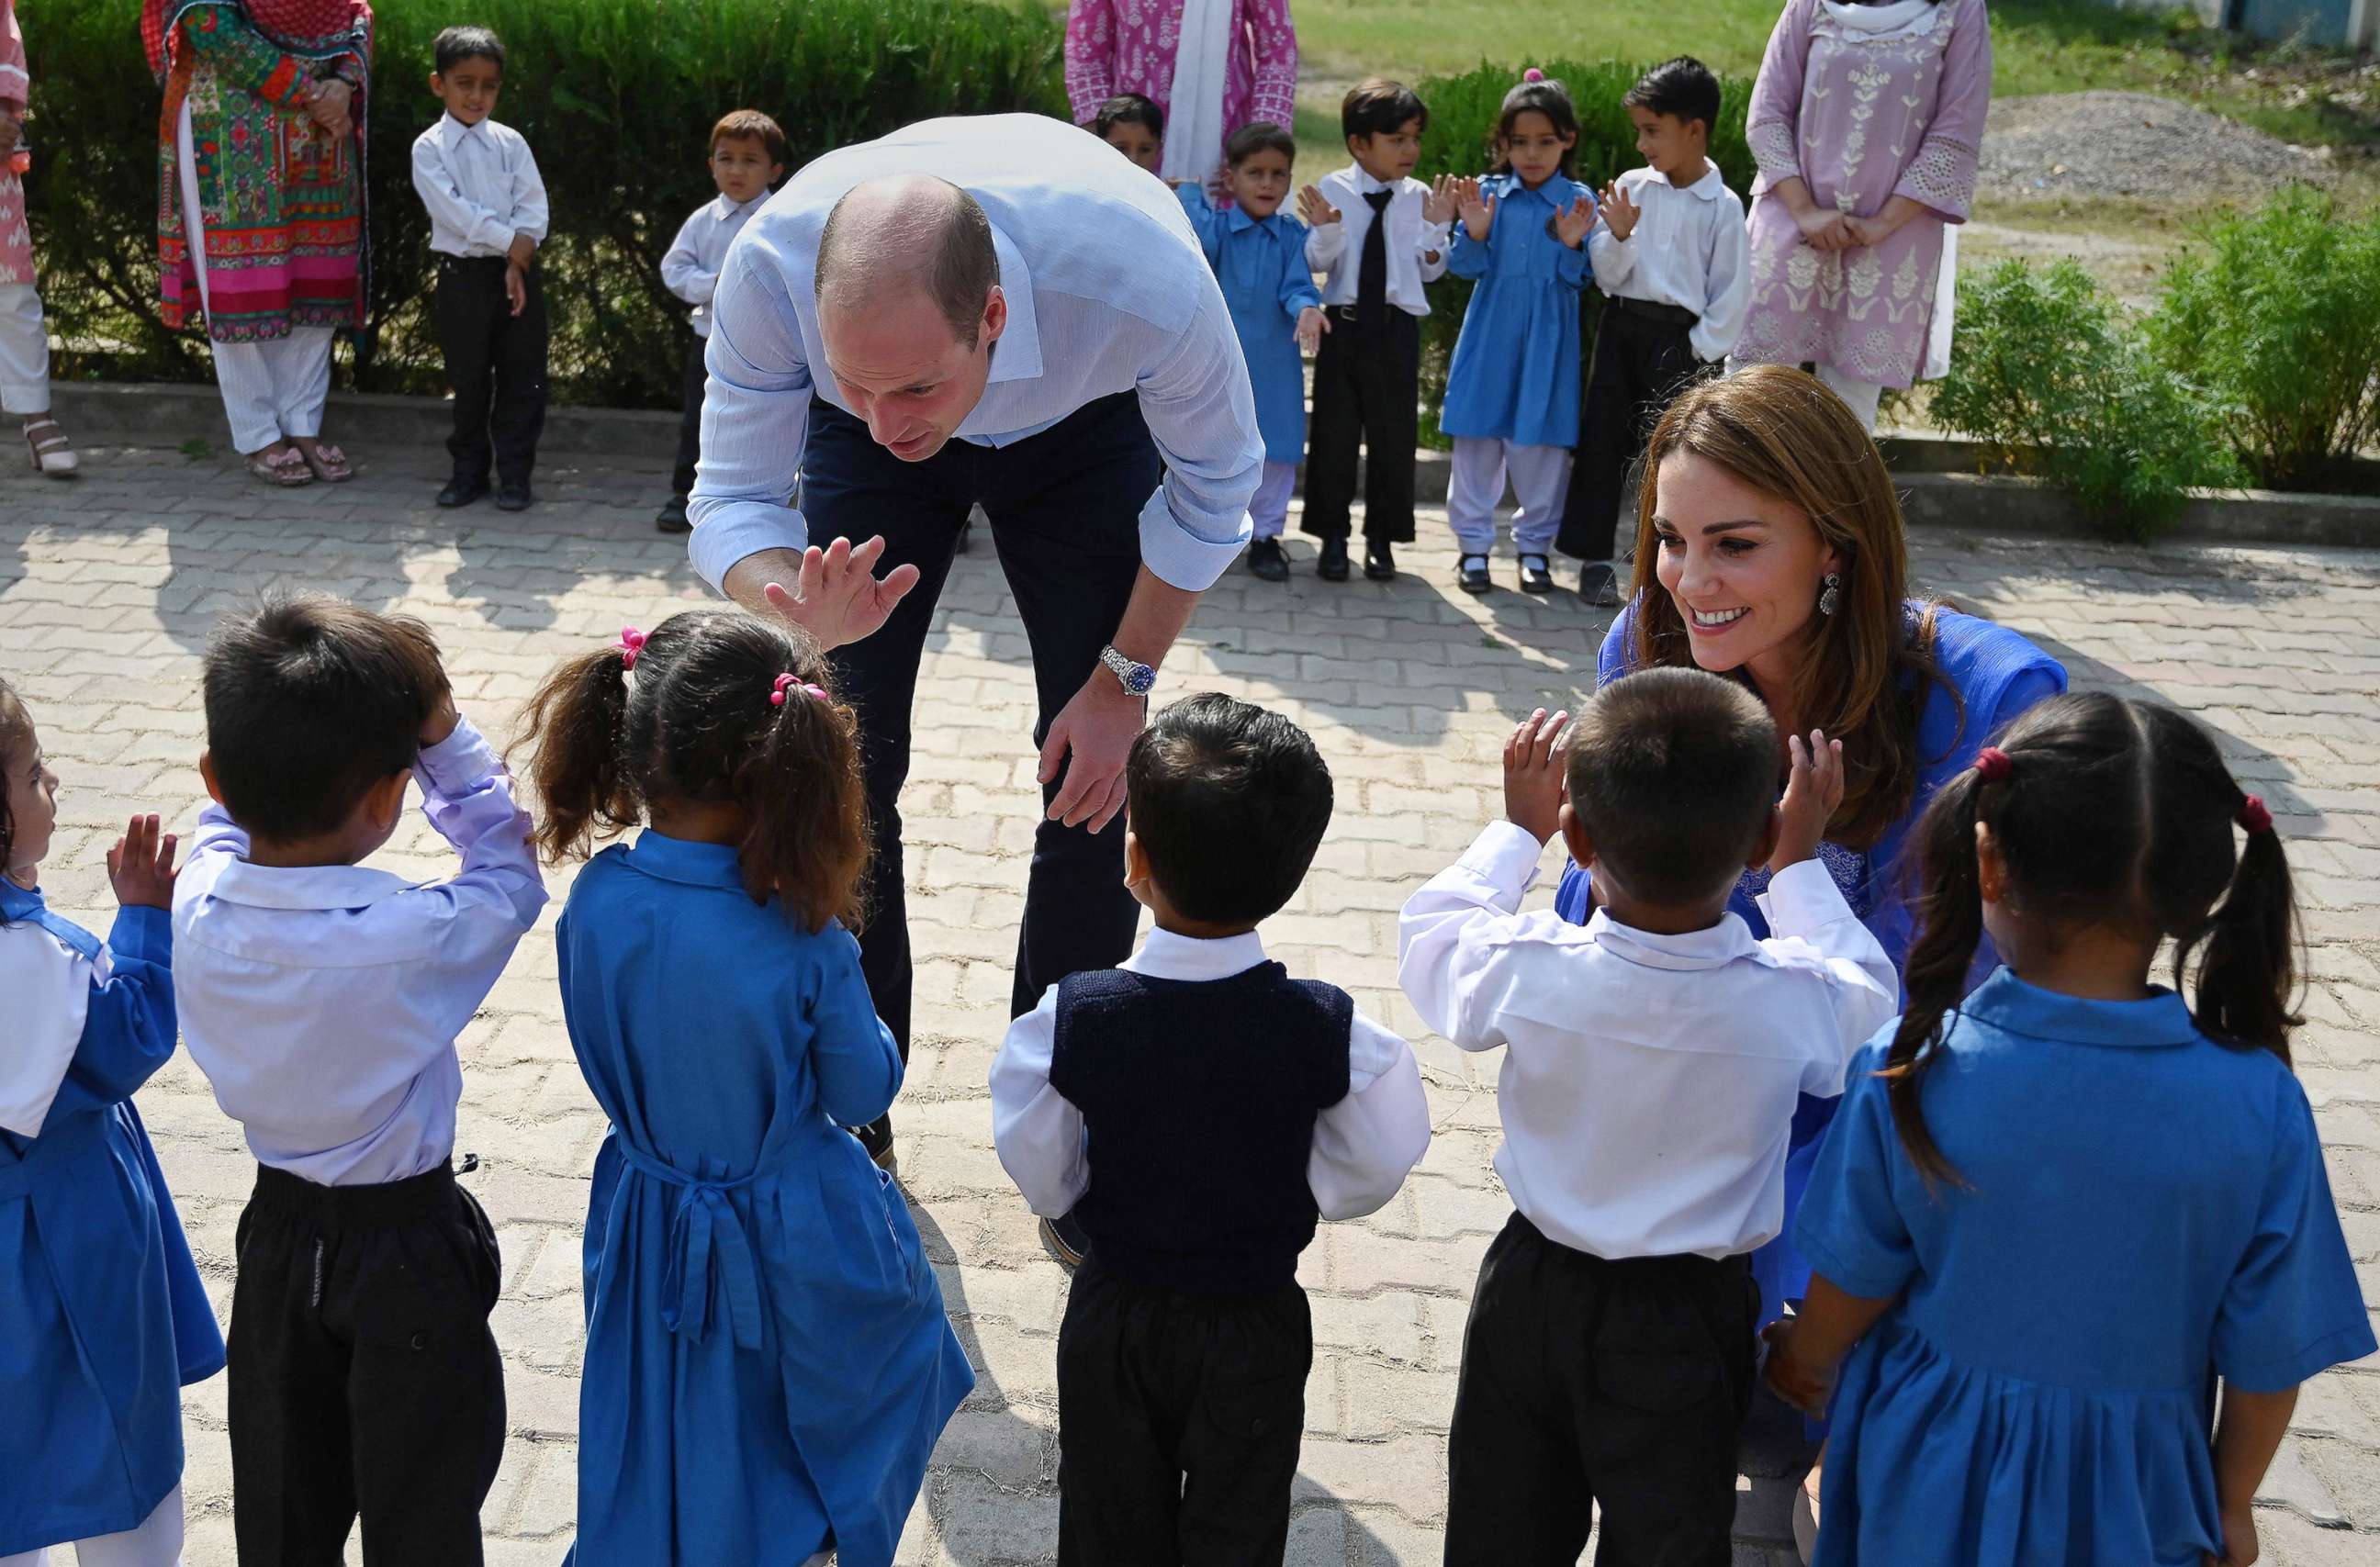 PHOTO: Britain's Prince William, Duke of Cambridge, and his wife Catherine, Duchess of Cambridge, meet with school children during their visit to a government-run school in Islamabad, Oct. 15, 2019.